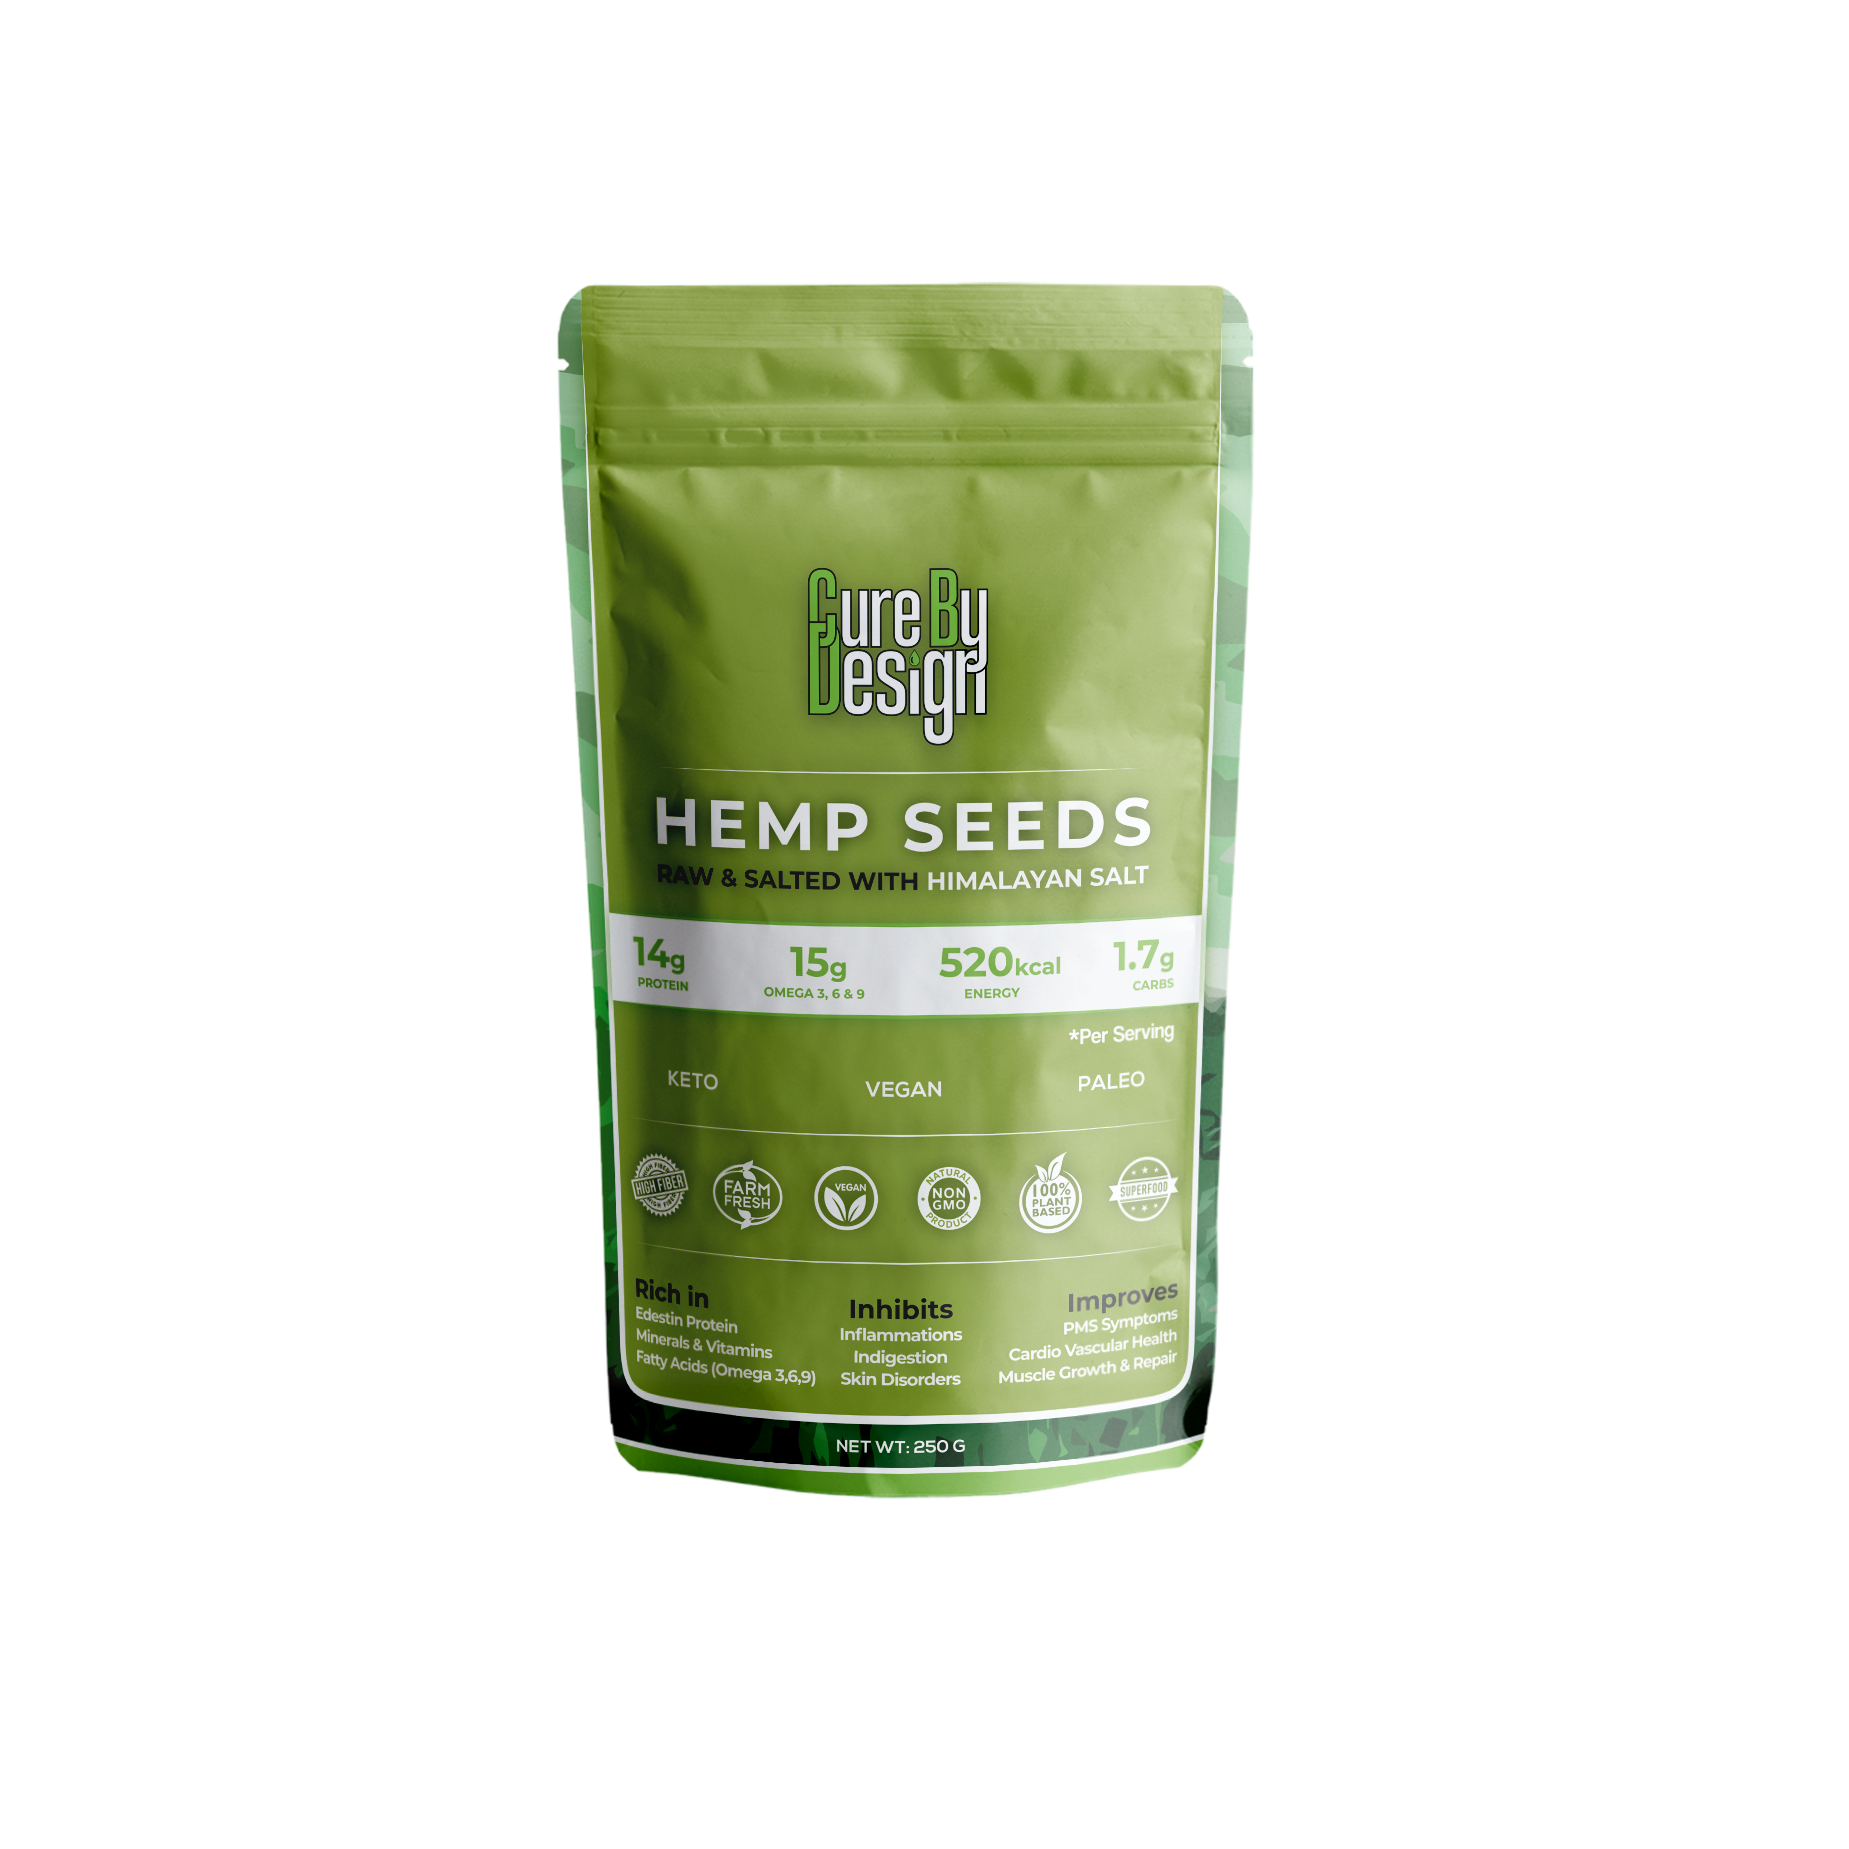 Cure By Design Hemp Seed Toasted with Pink Salt - Orgo All-Natural